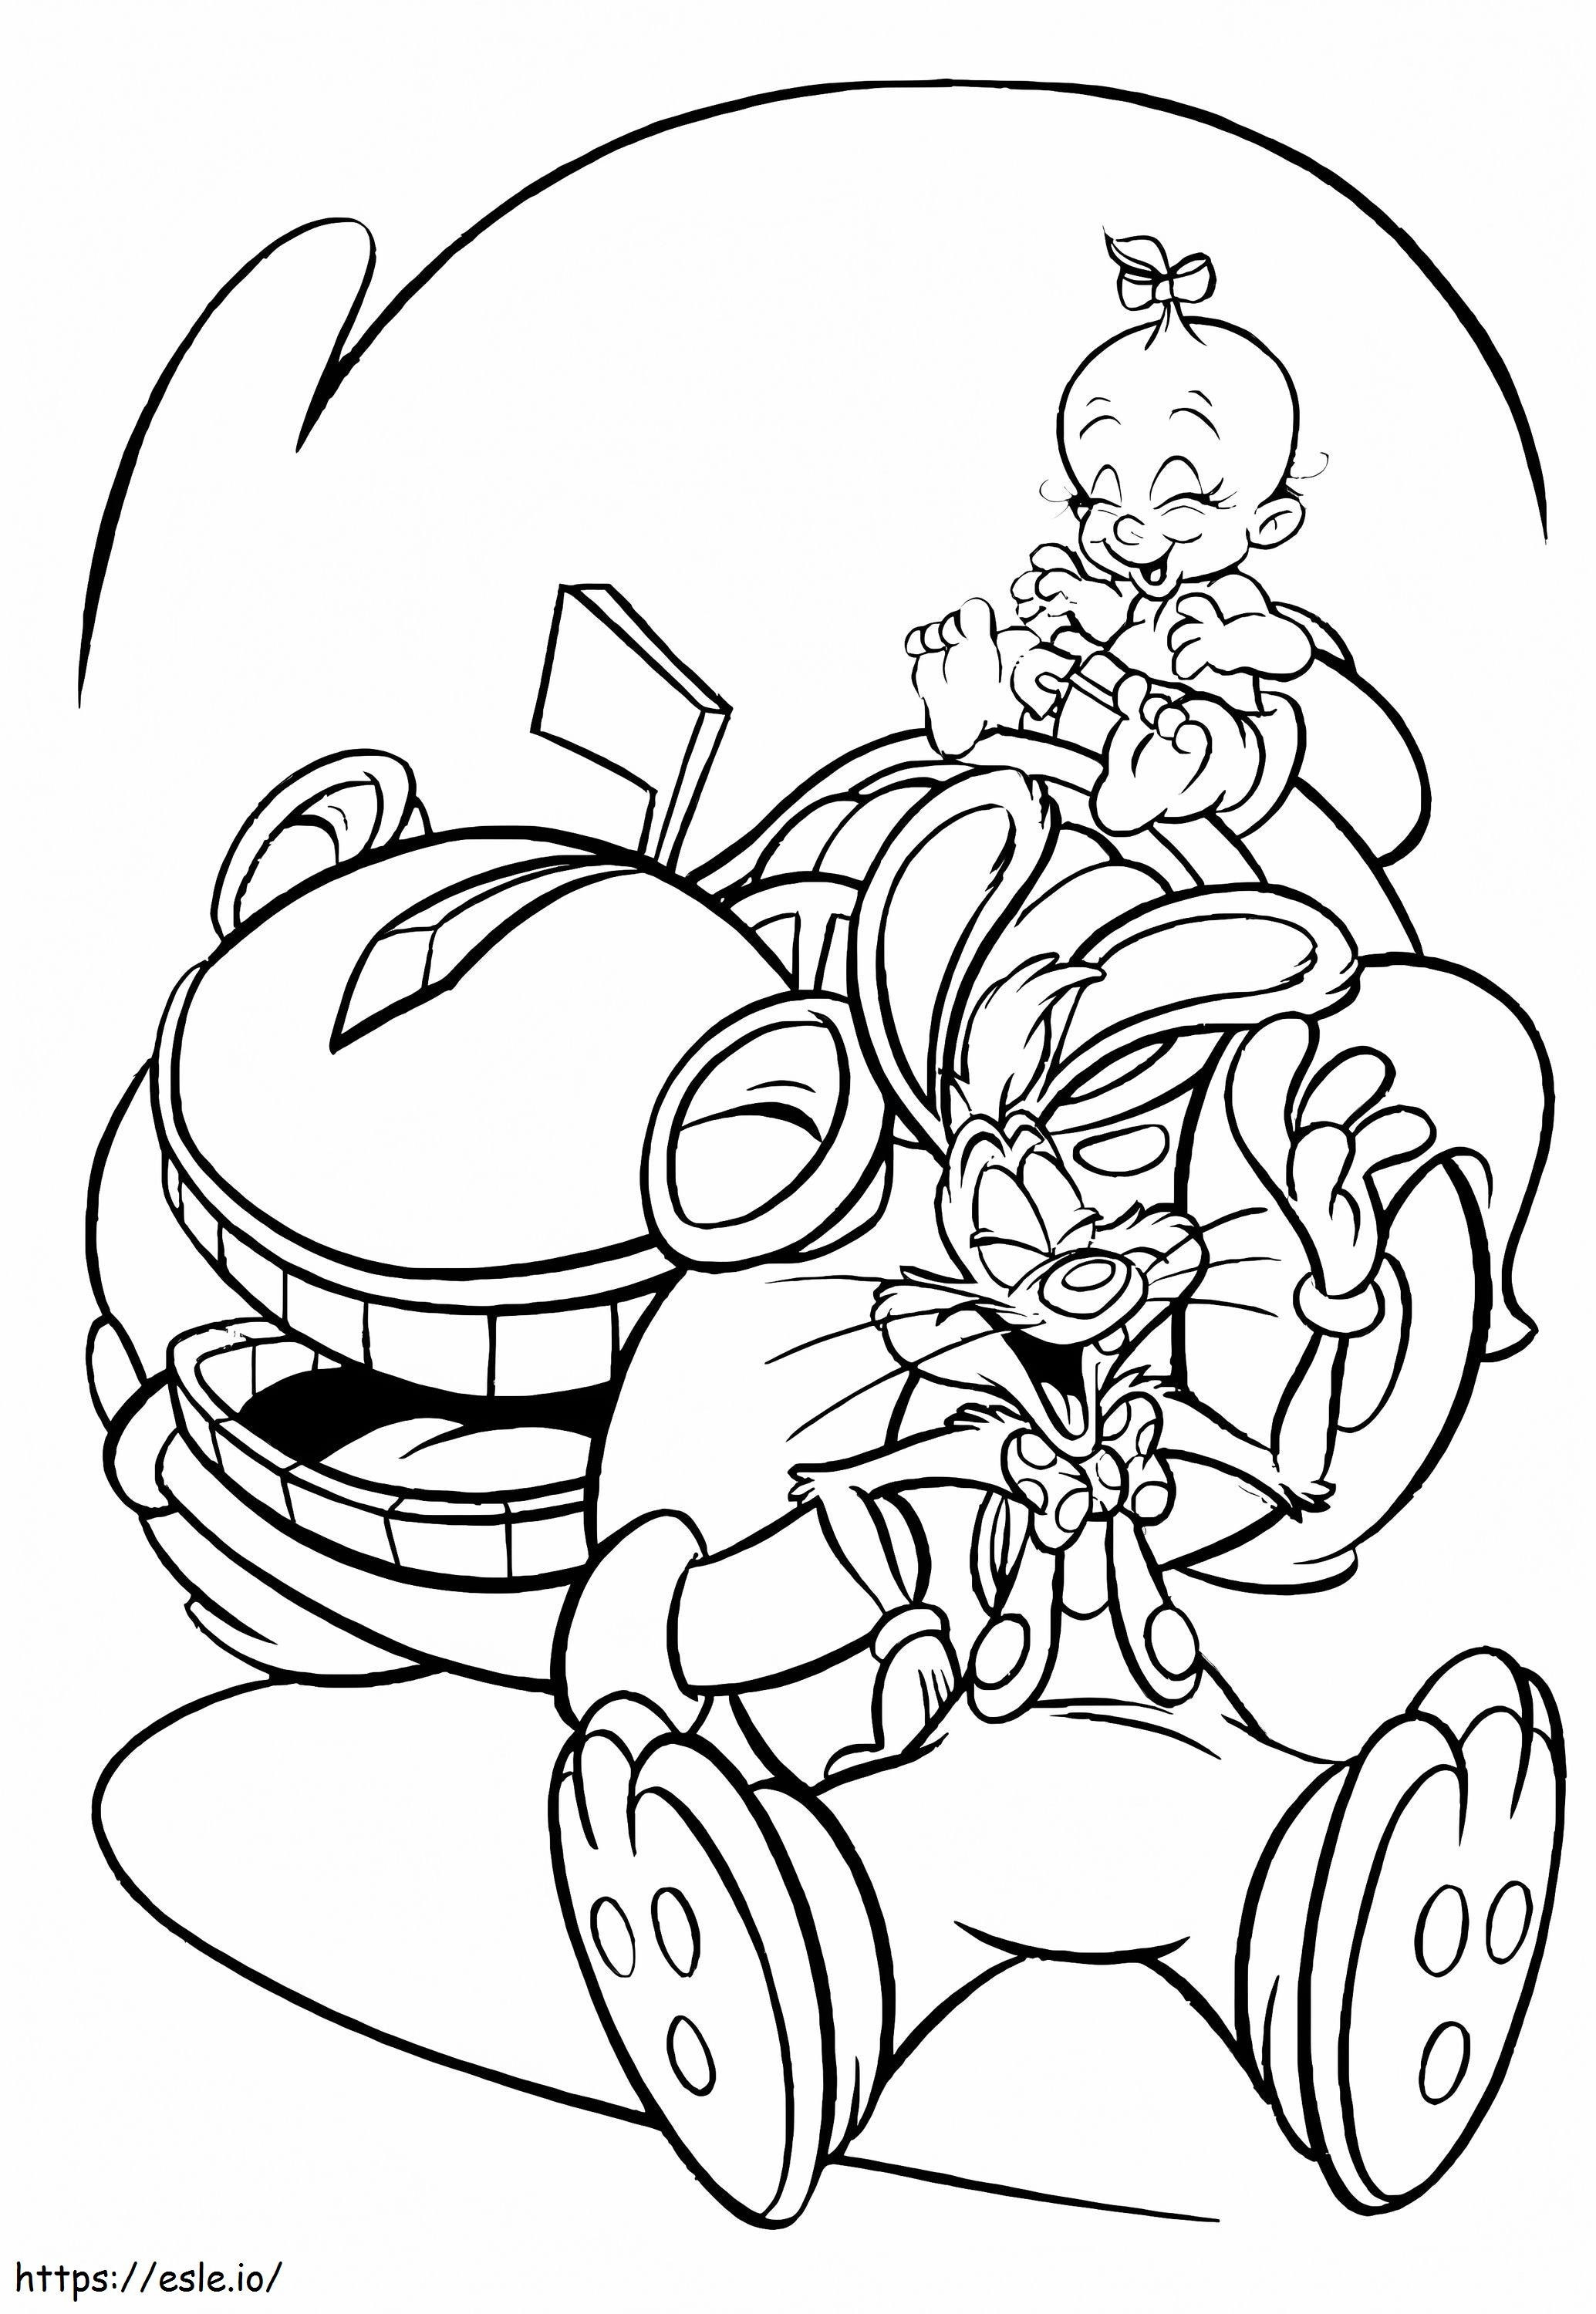 Characters From Roger Rabbit coloring page